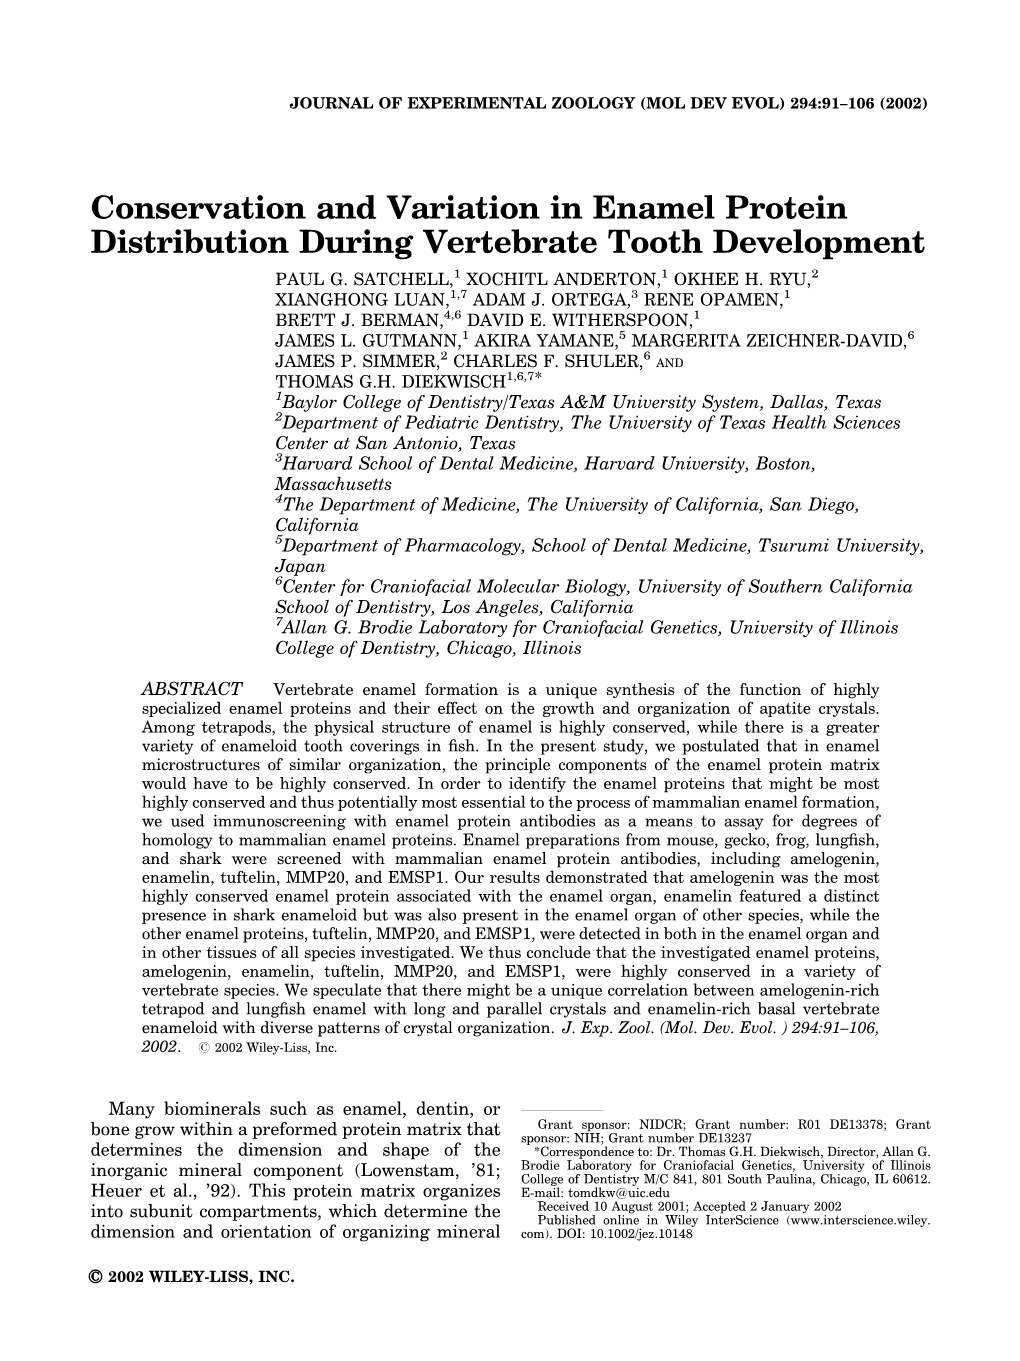 Conservation and Variation in Enamel Protein Distribution During Vertebrate Tooth Development PAUL G